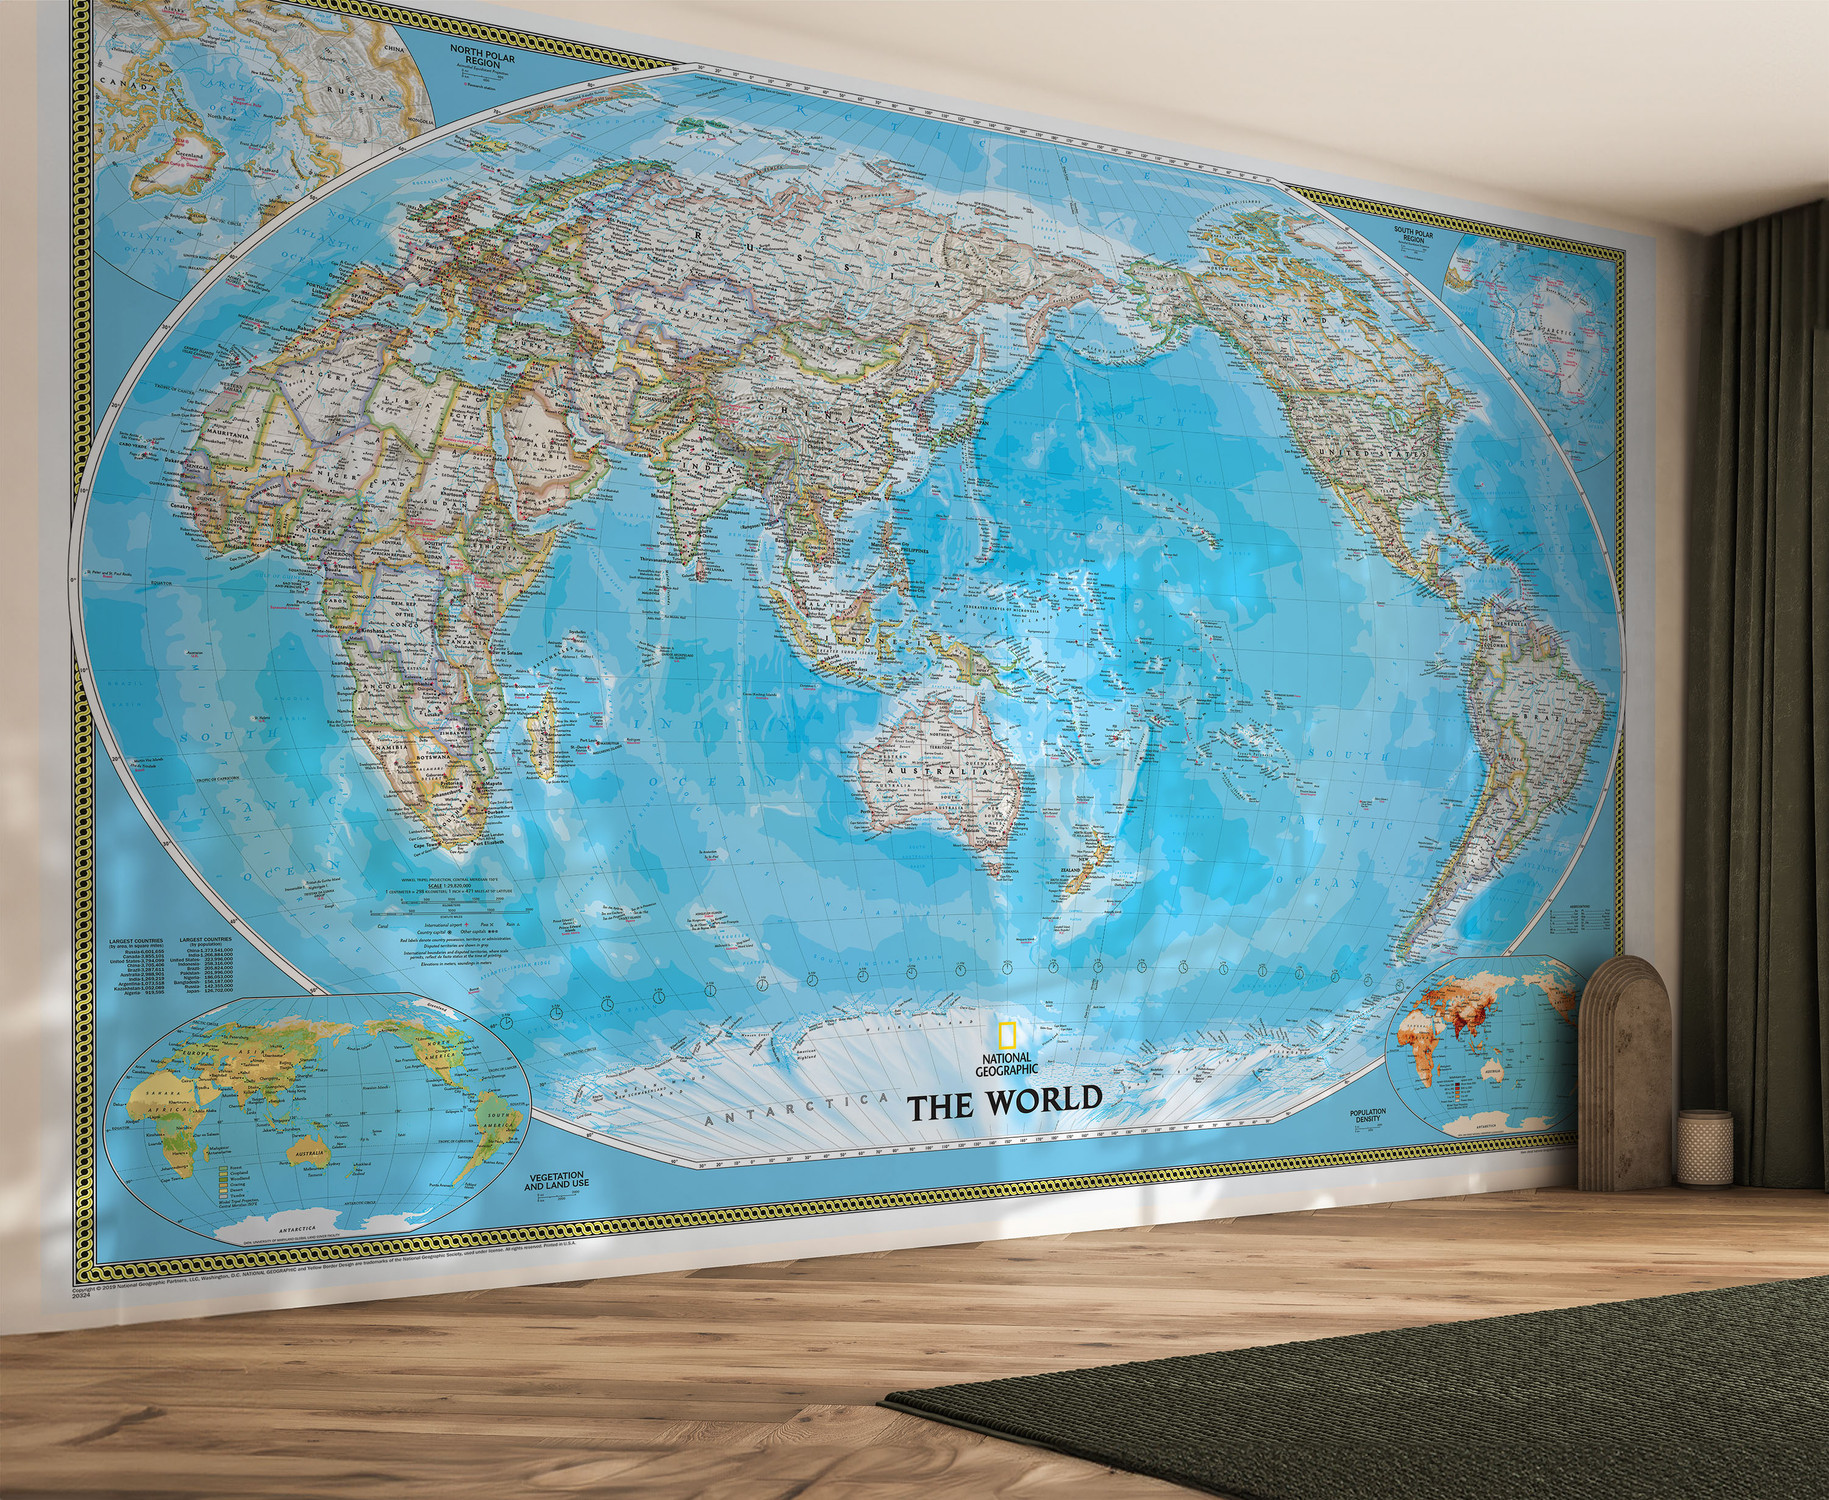 National Geographic World Map Mural - Classic Pacific Centered in Room